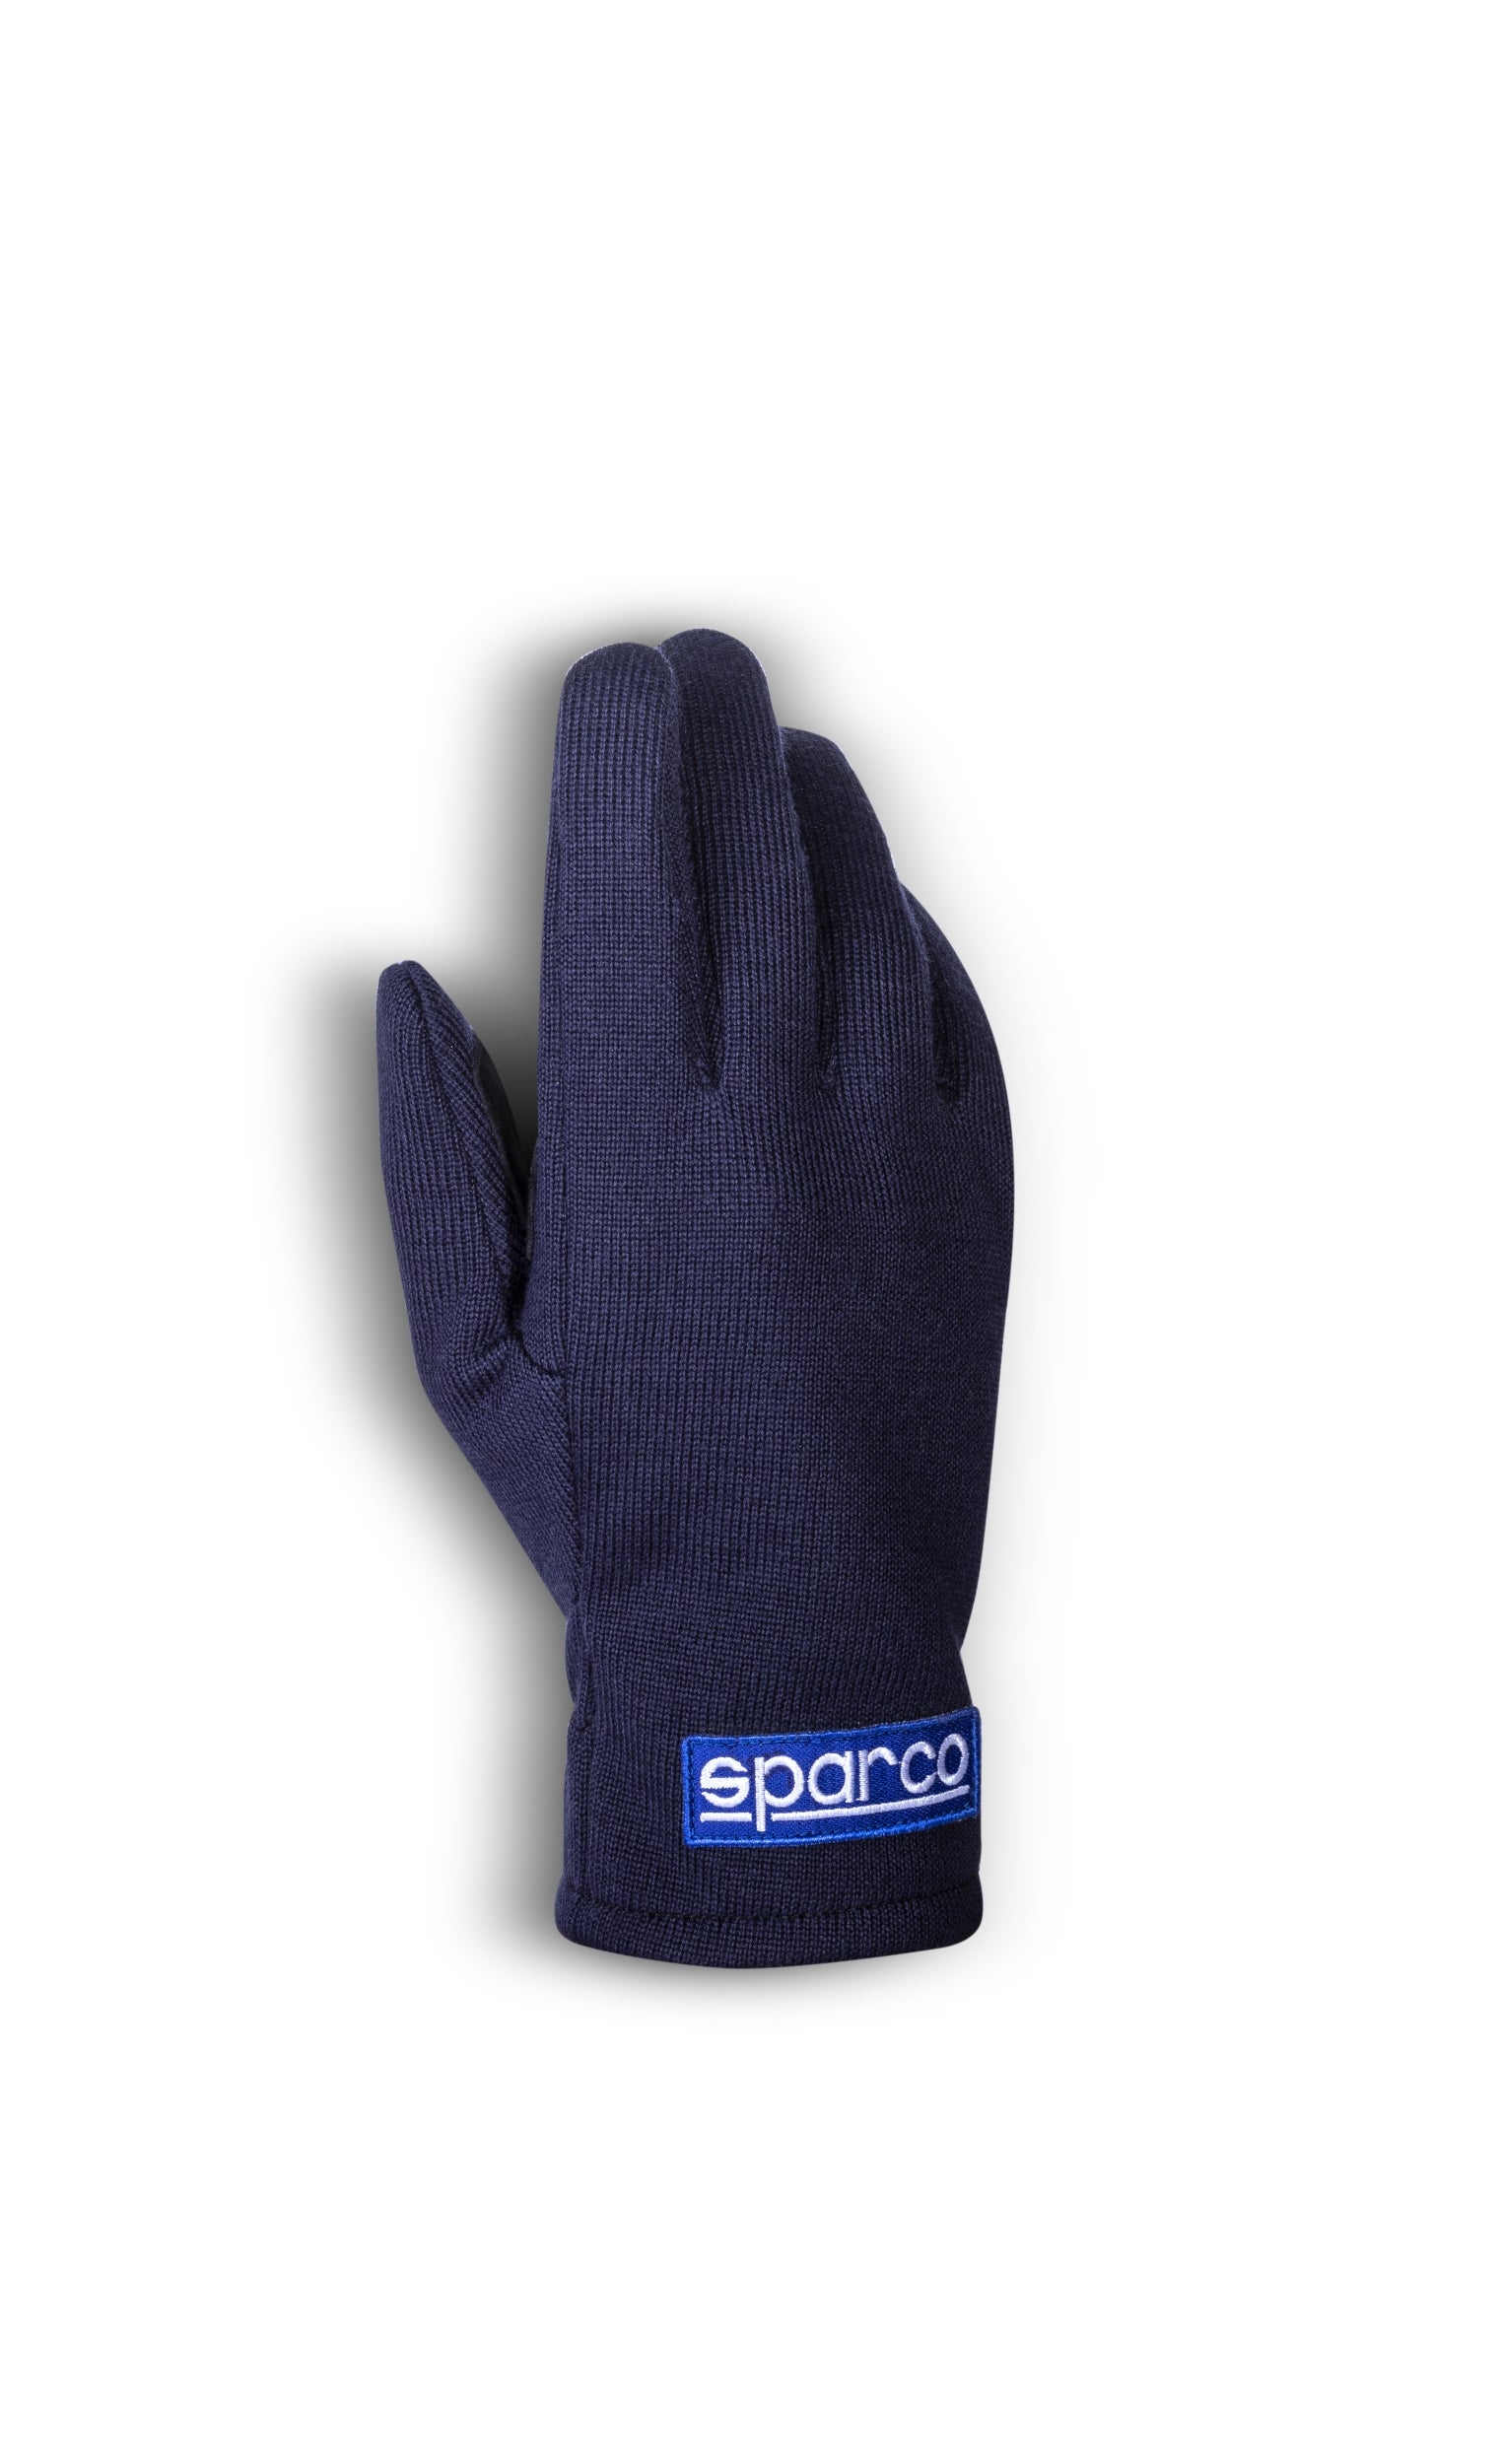 SPARCO 00208211BM NEW WOOL SPORTDRIVE Gloves, navy blue, size 11 Photo-0 